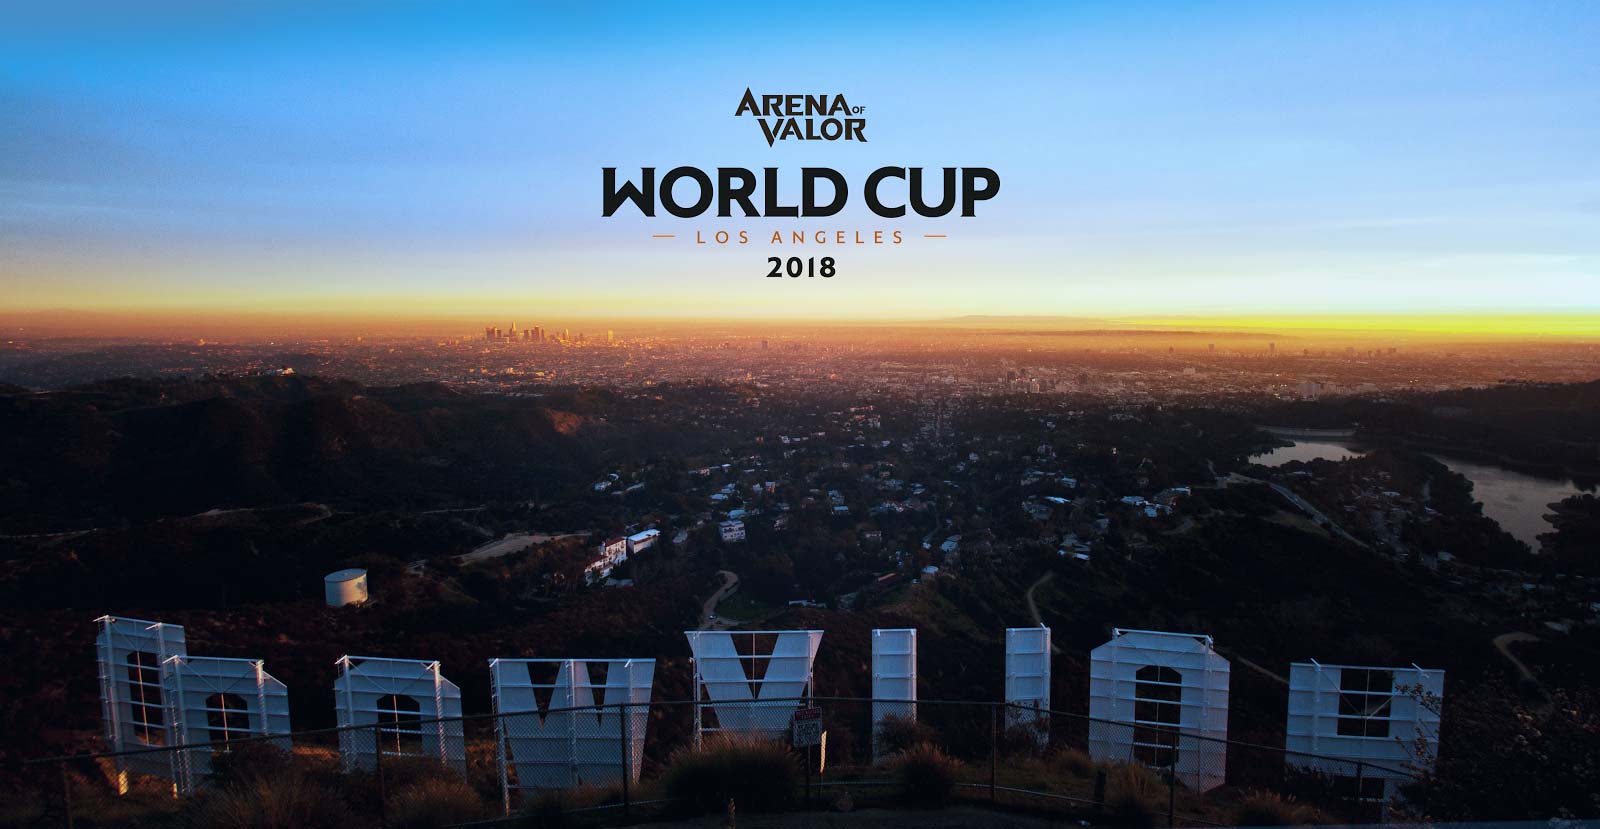 Arena of Valor 2018 World Cup